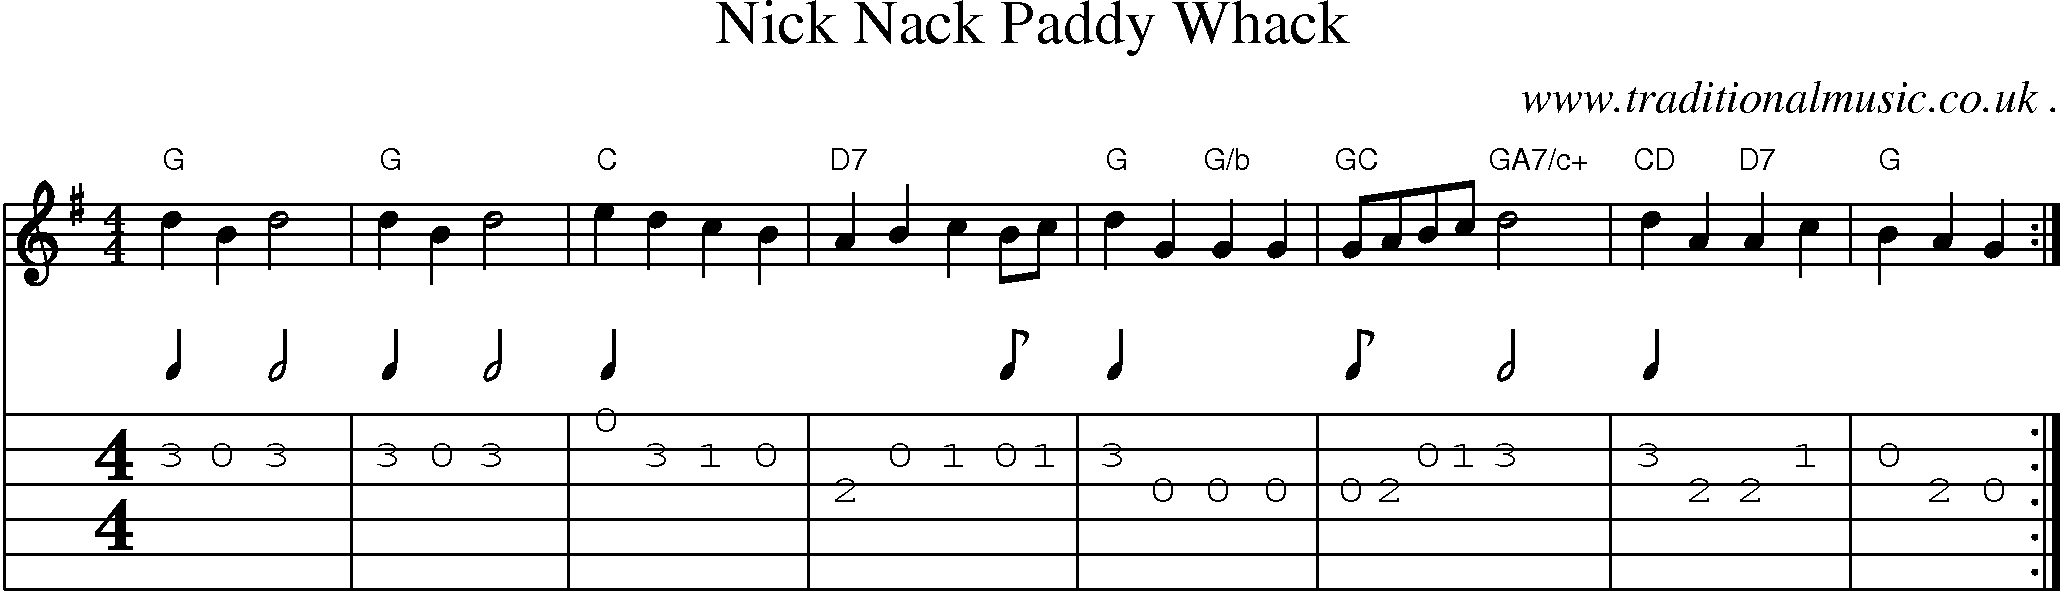 Sheet-Music and Guitar Tabs for Nick Nack Paddy Whack